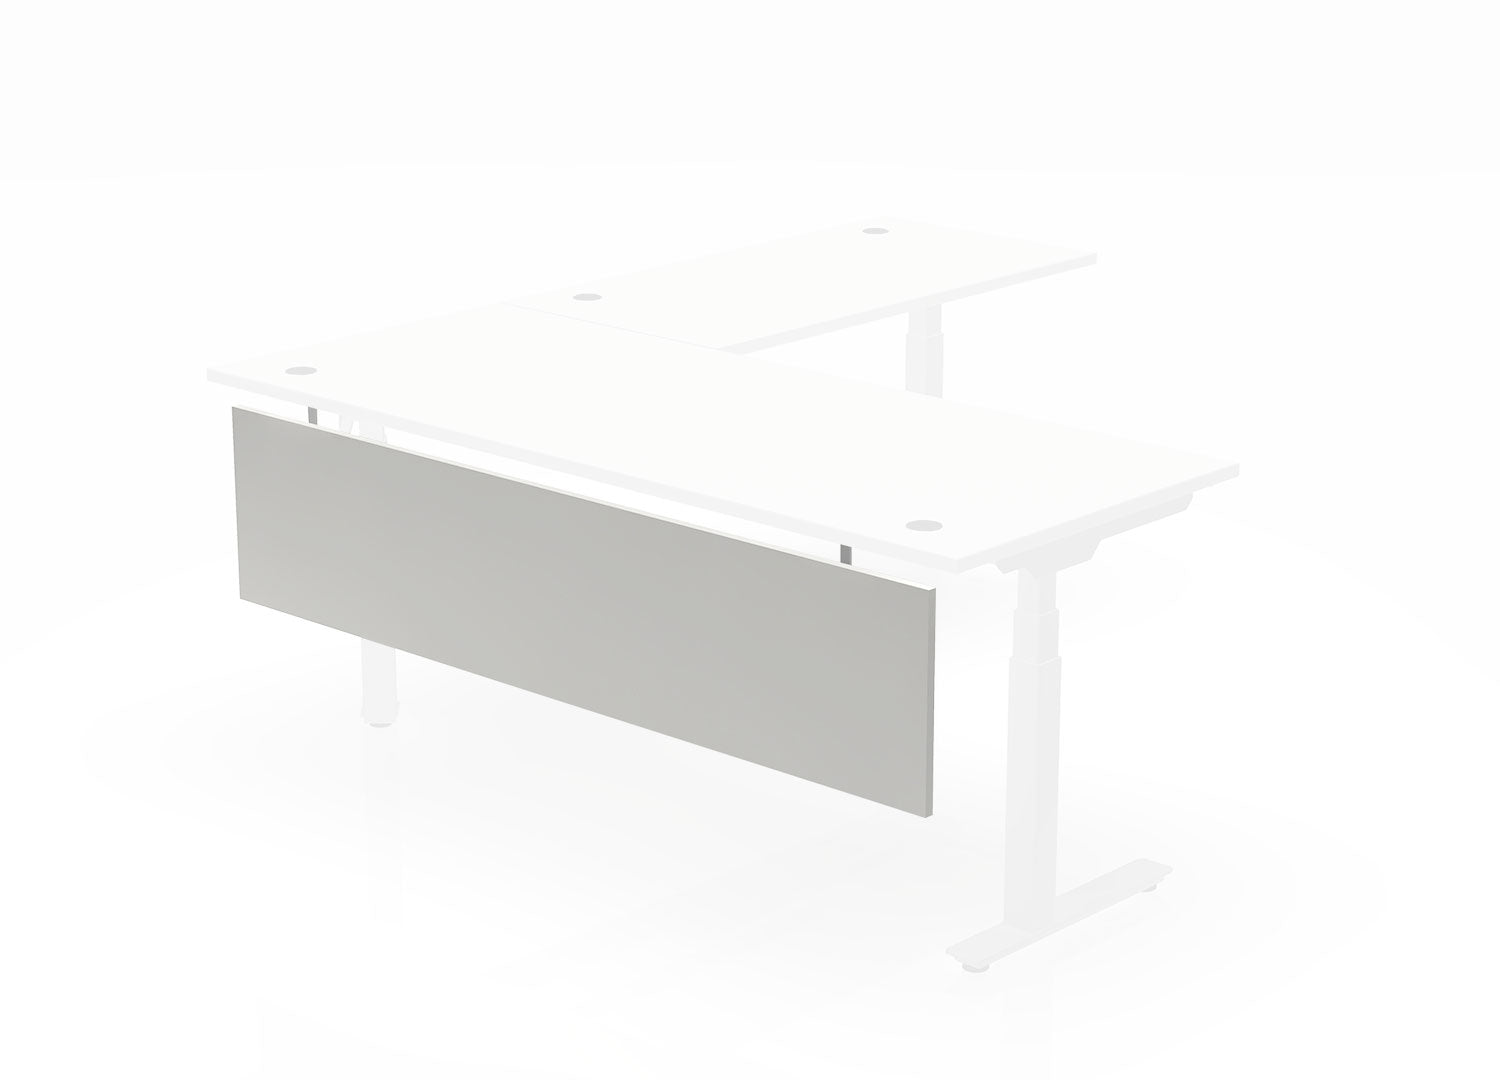 Acrylic Modesty Panel 48, Electric Standing Desk Partition